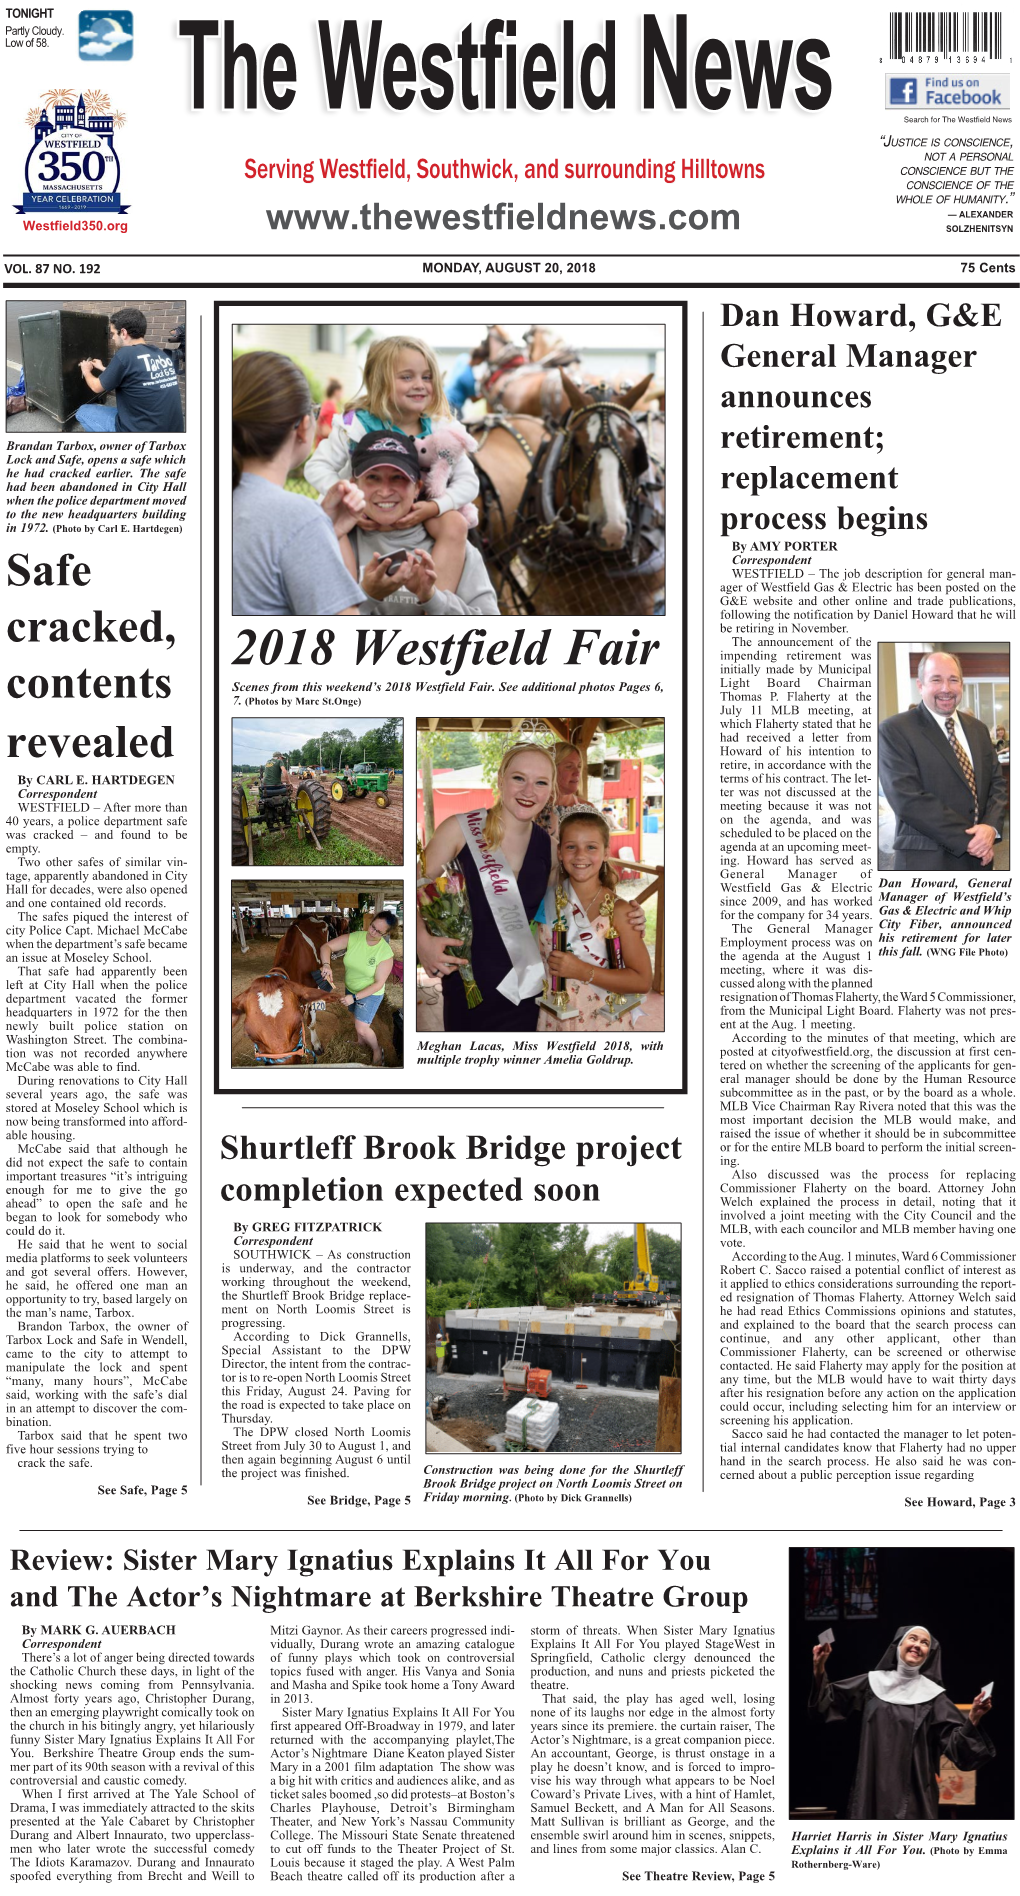 2018 Westfield Fair Initially Made by Municipal Scenes from This Weekend’S 2018 Westfield Fair